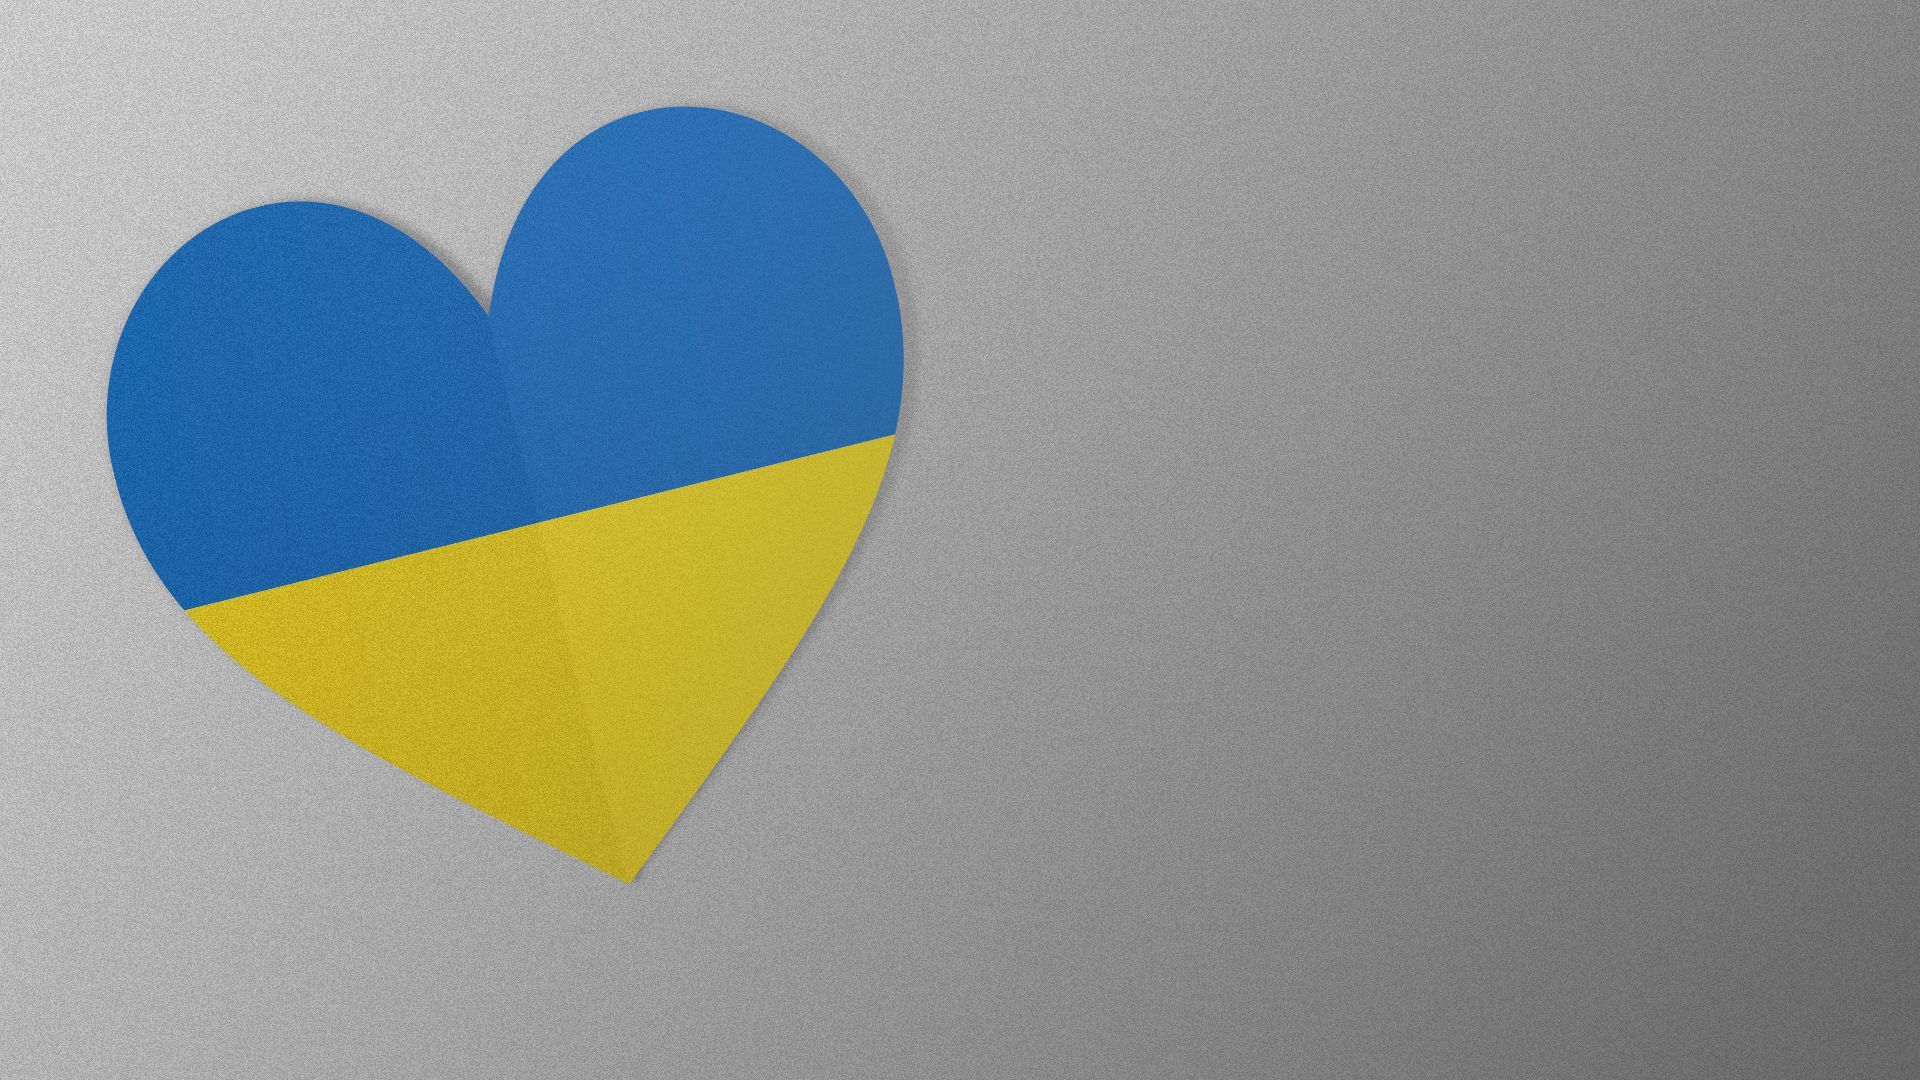 Illustration of a paper heart overlaid with the Ukrainian flag